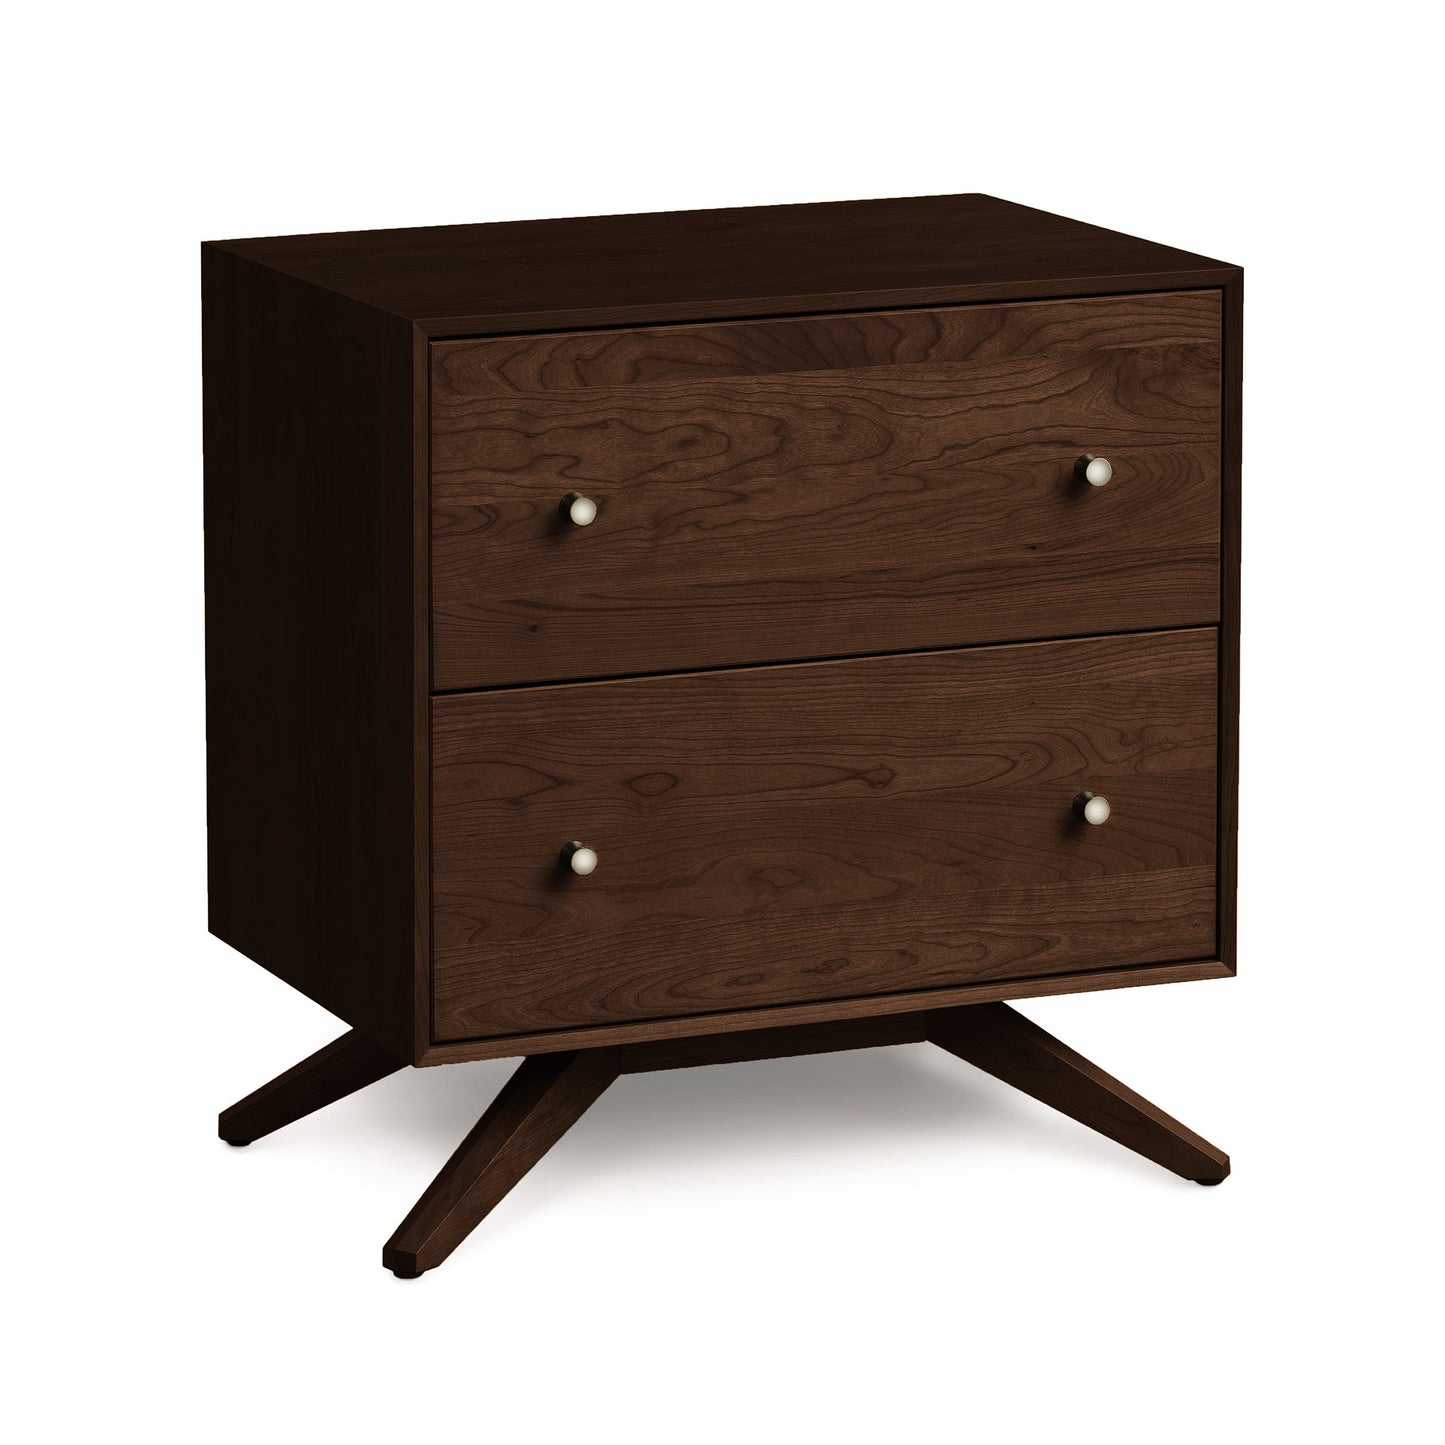 An Astrid 2-Drawer Nightstand by Copeland Furniture, sporting a modern design, standing on splayed legs against a white background.